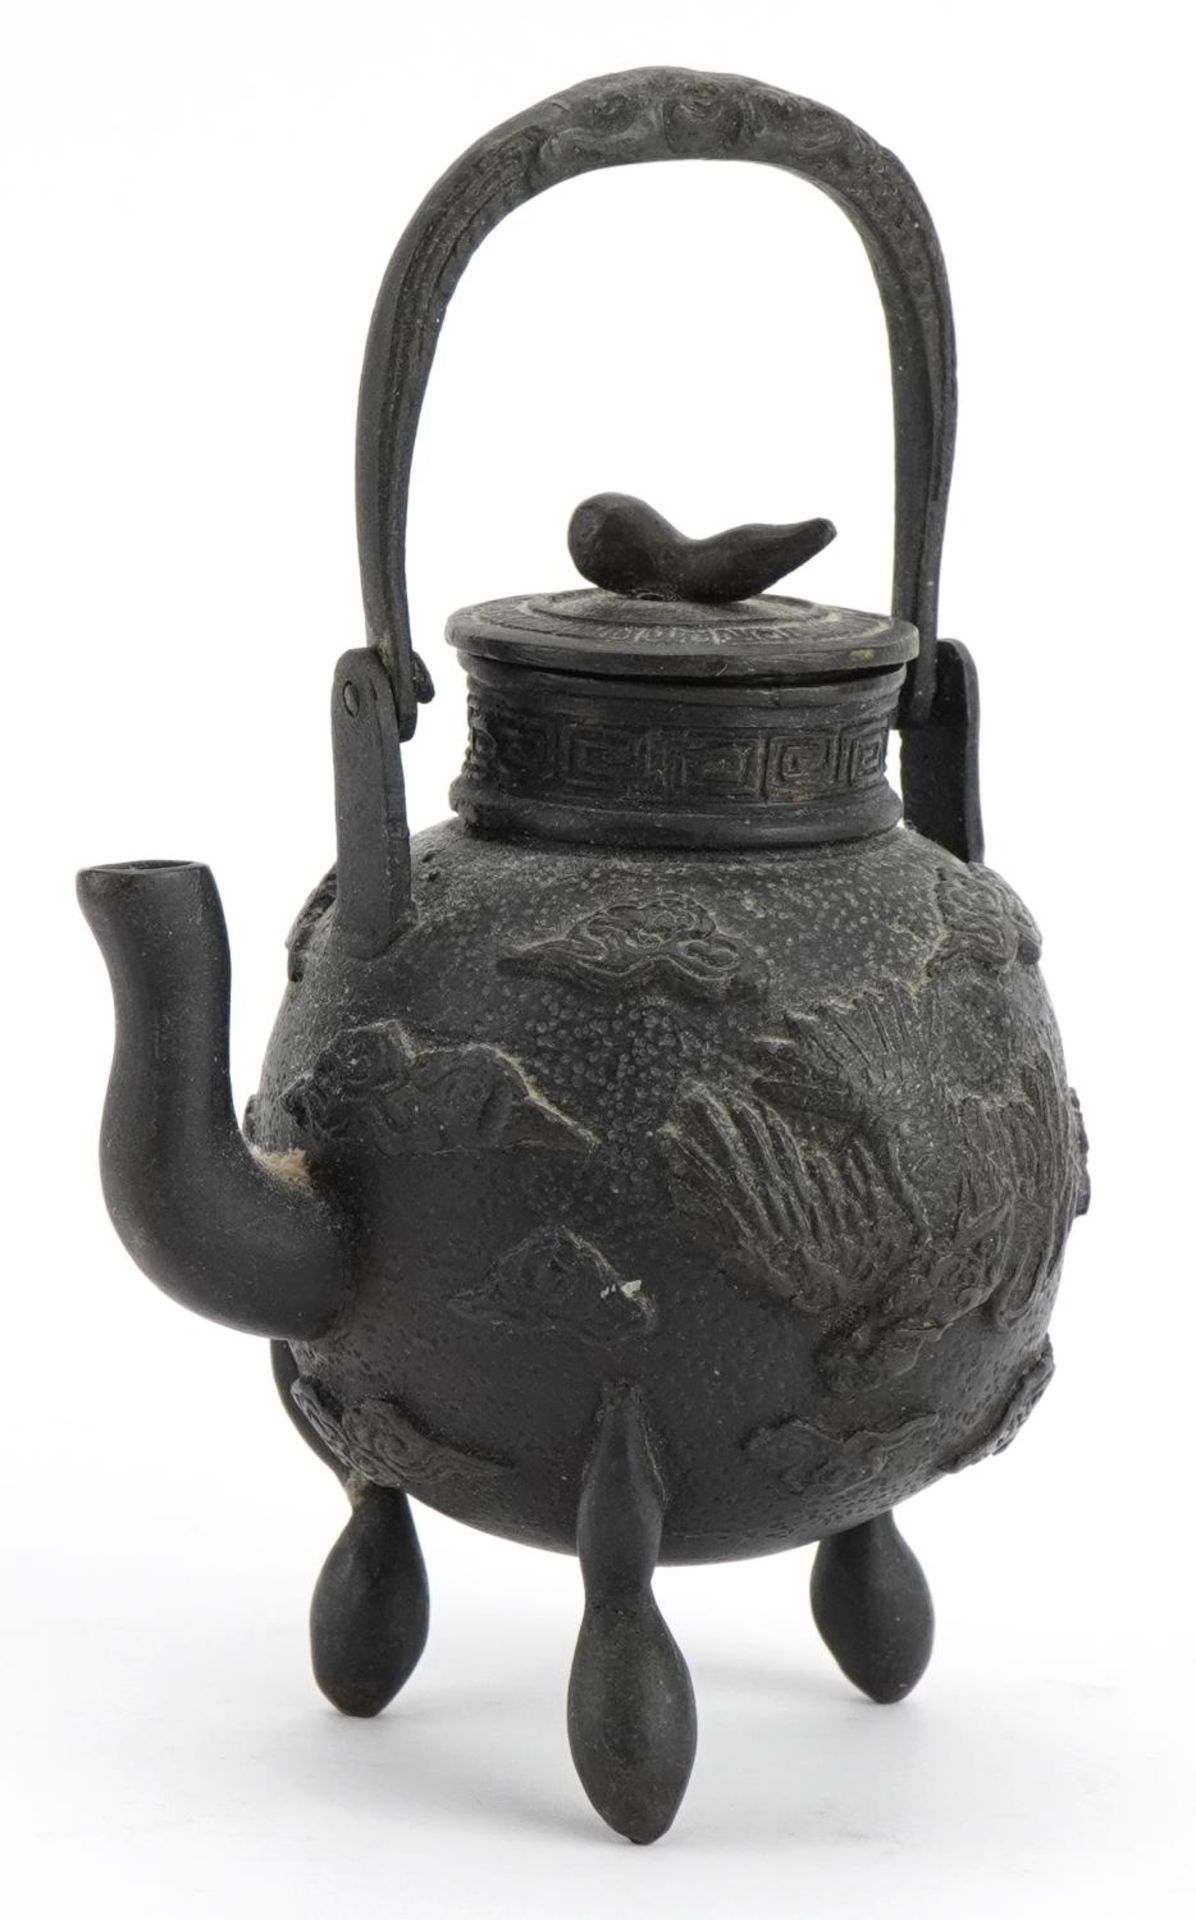 Miniature Asian three footed patinated bronze teapot cast with phoenixes amongst clouds, Chinese